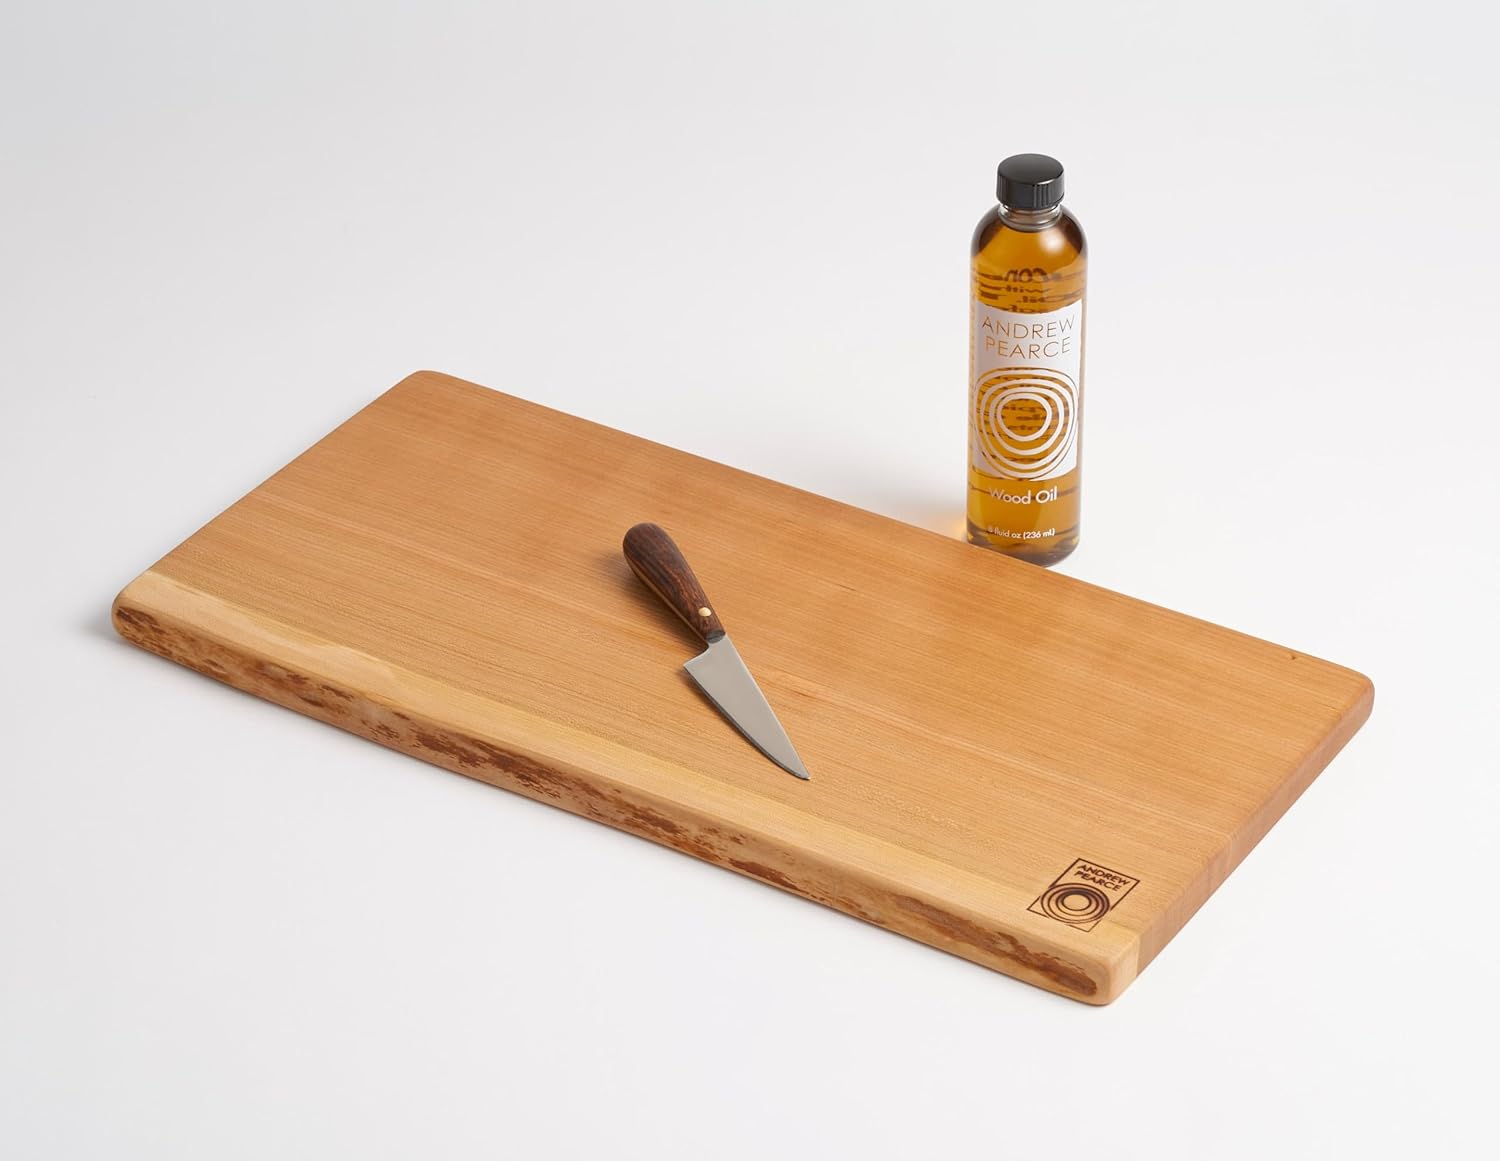 Andrew Pearce Premium Walnut Wood Oil Bowl Conditioner 8oz - Wooden Bowl and Cutting Board Oil : Health & Household